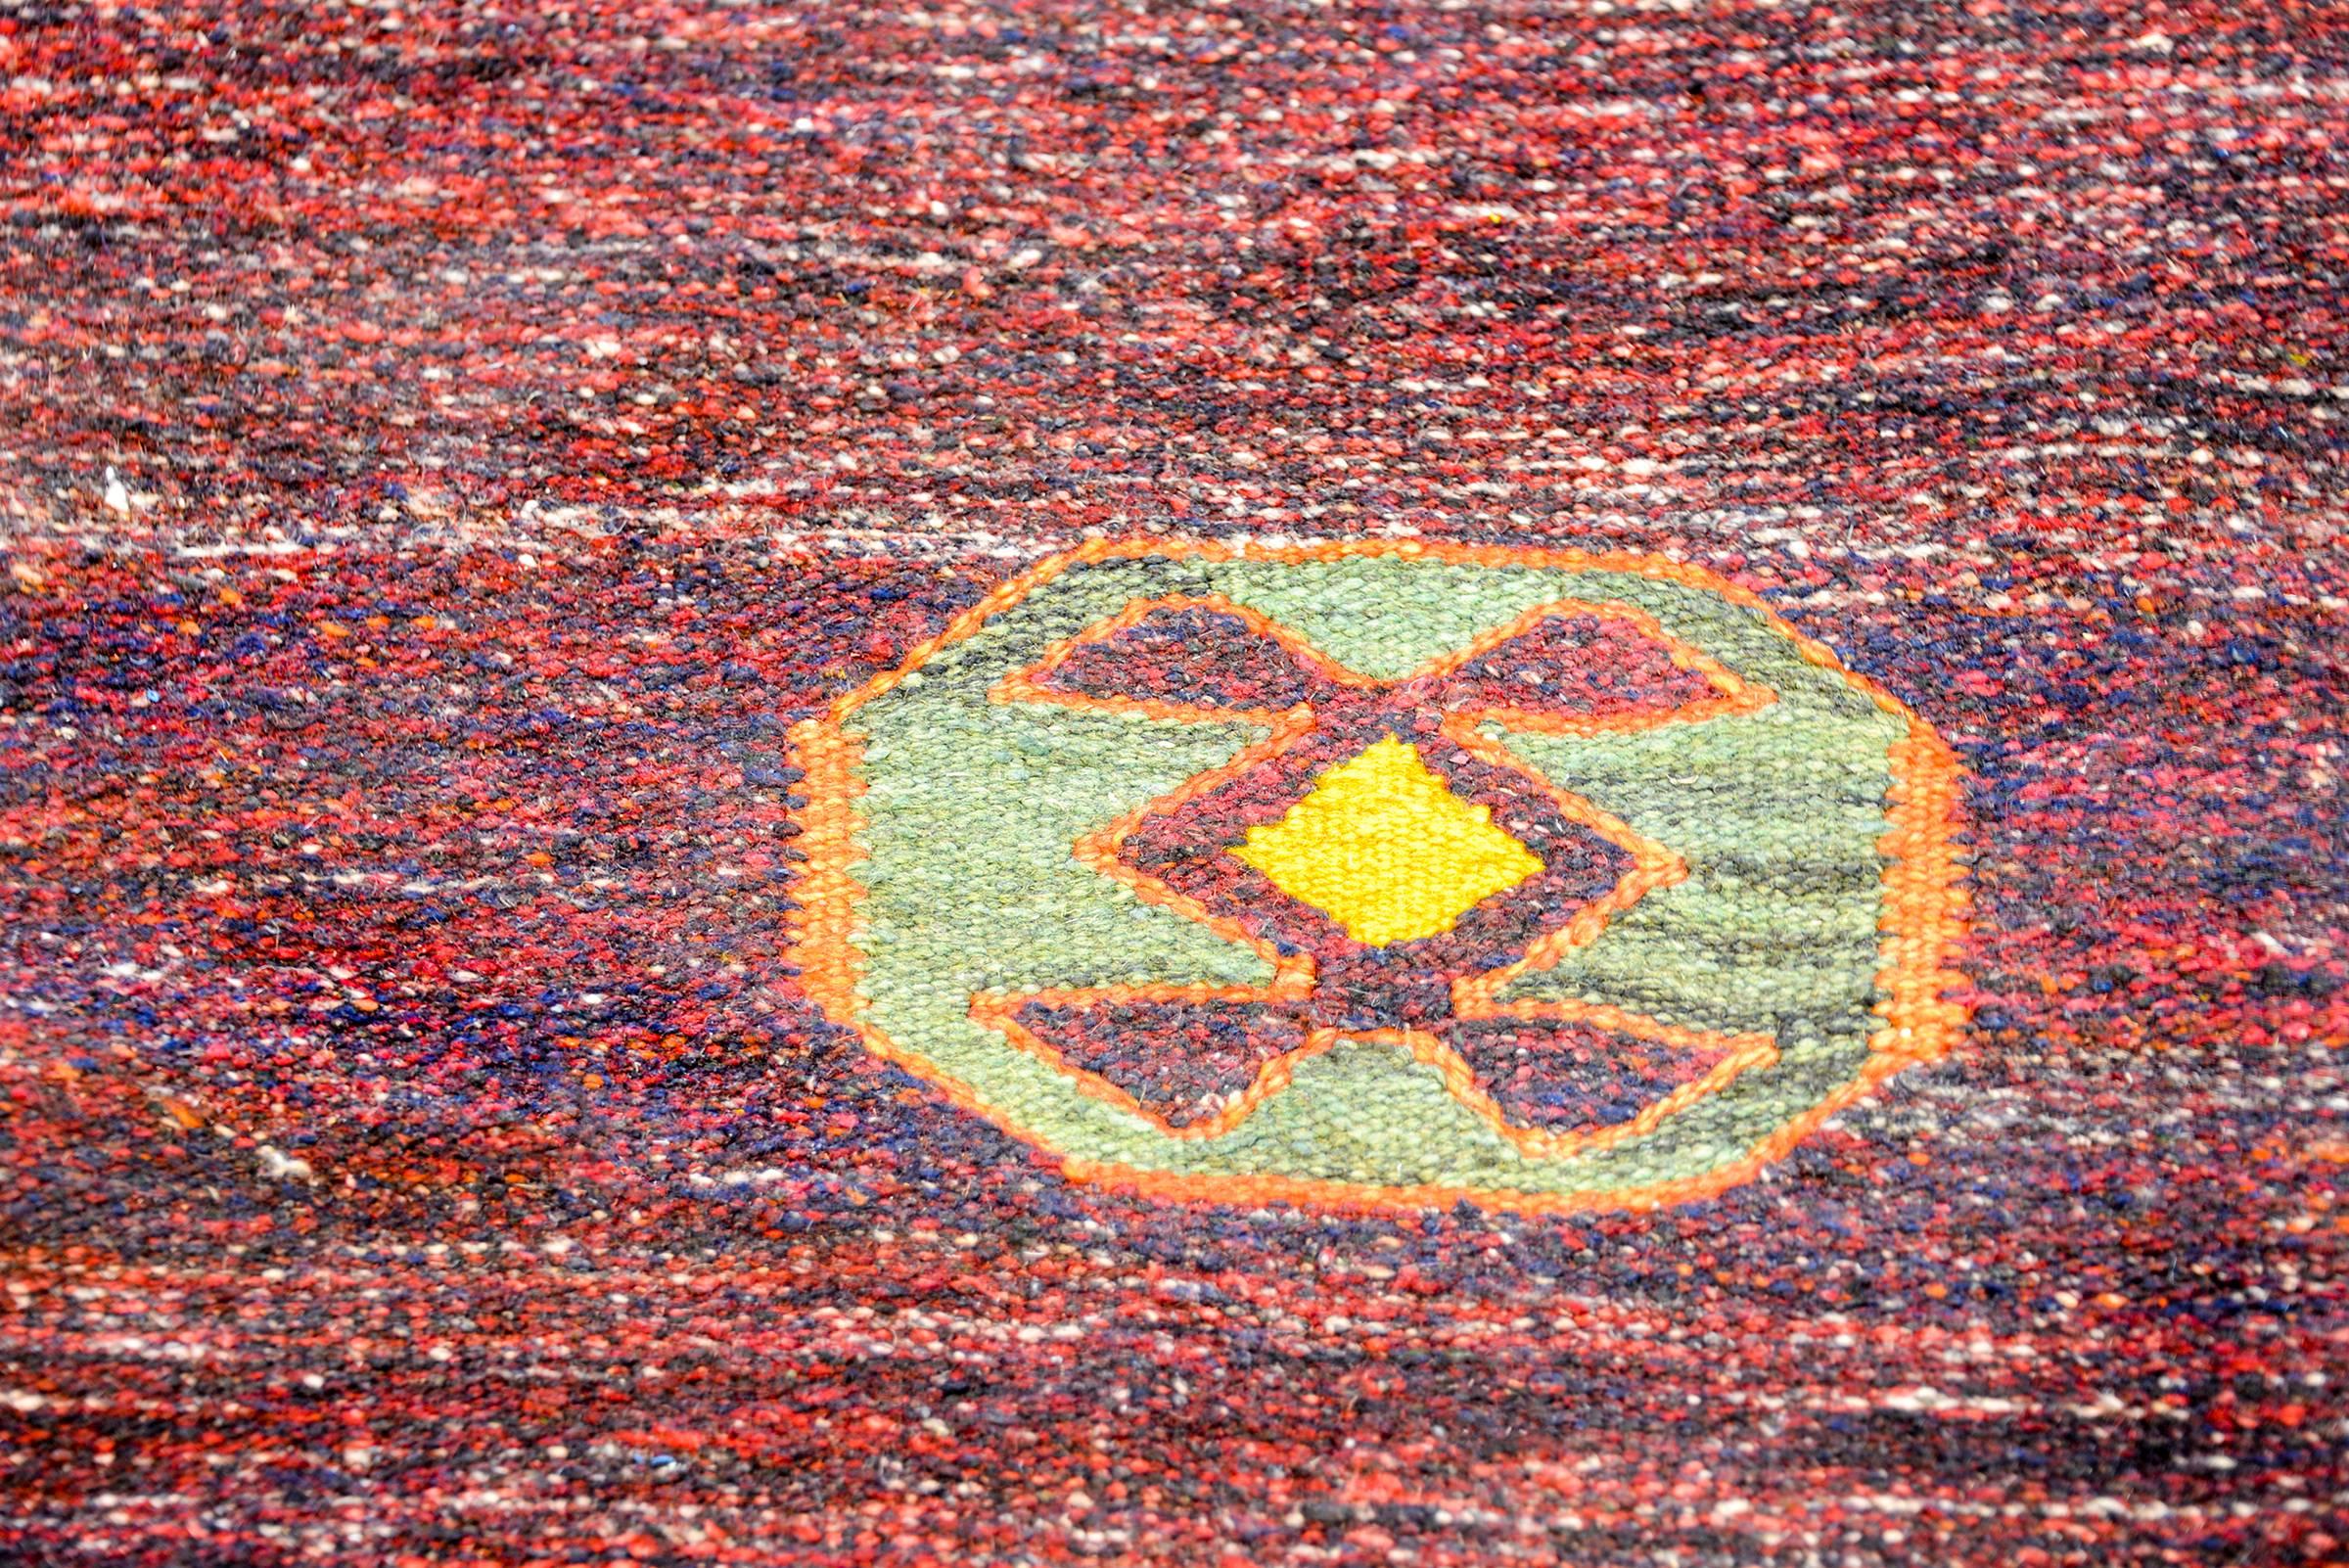 A wonderful vintage Gabbeh Kilim runner woven in beautiful red and indigo dyed wool, with one octagonal medallion floating in the field.